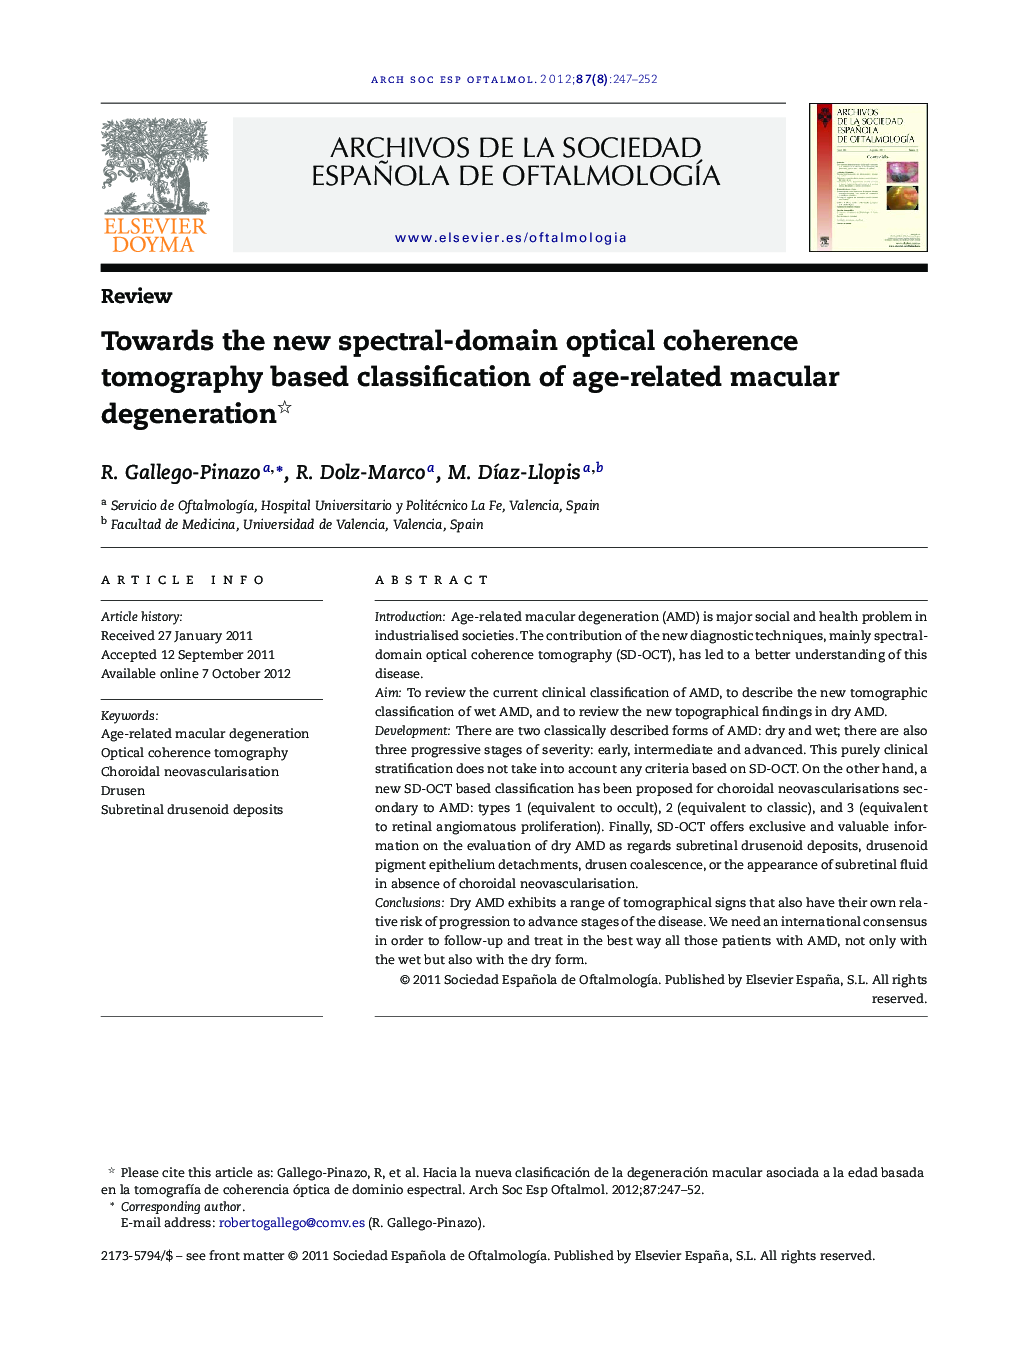 Towards the new spectral-domain optical coherence tomography based classification of age-related macular degeneration 